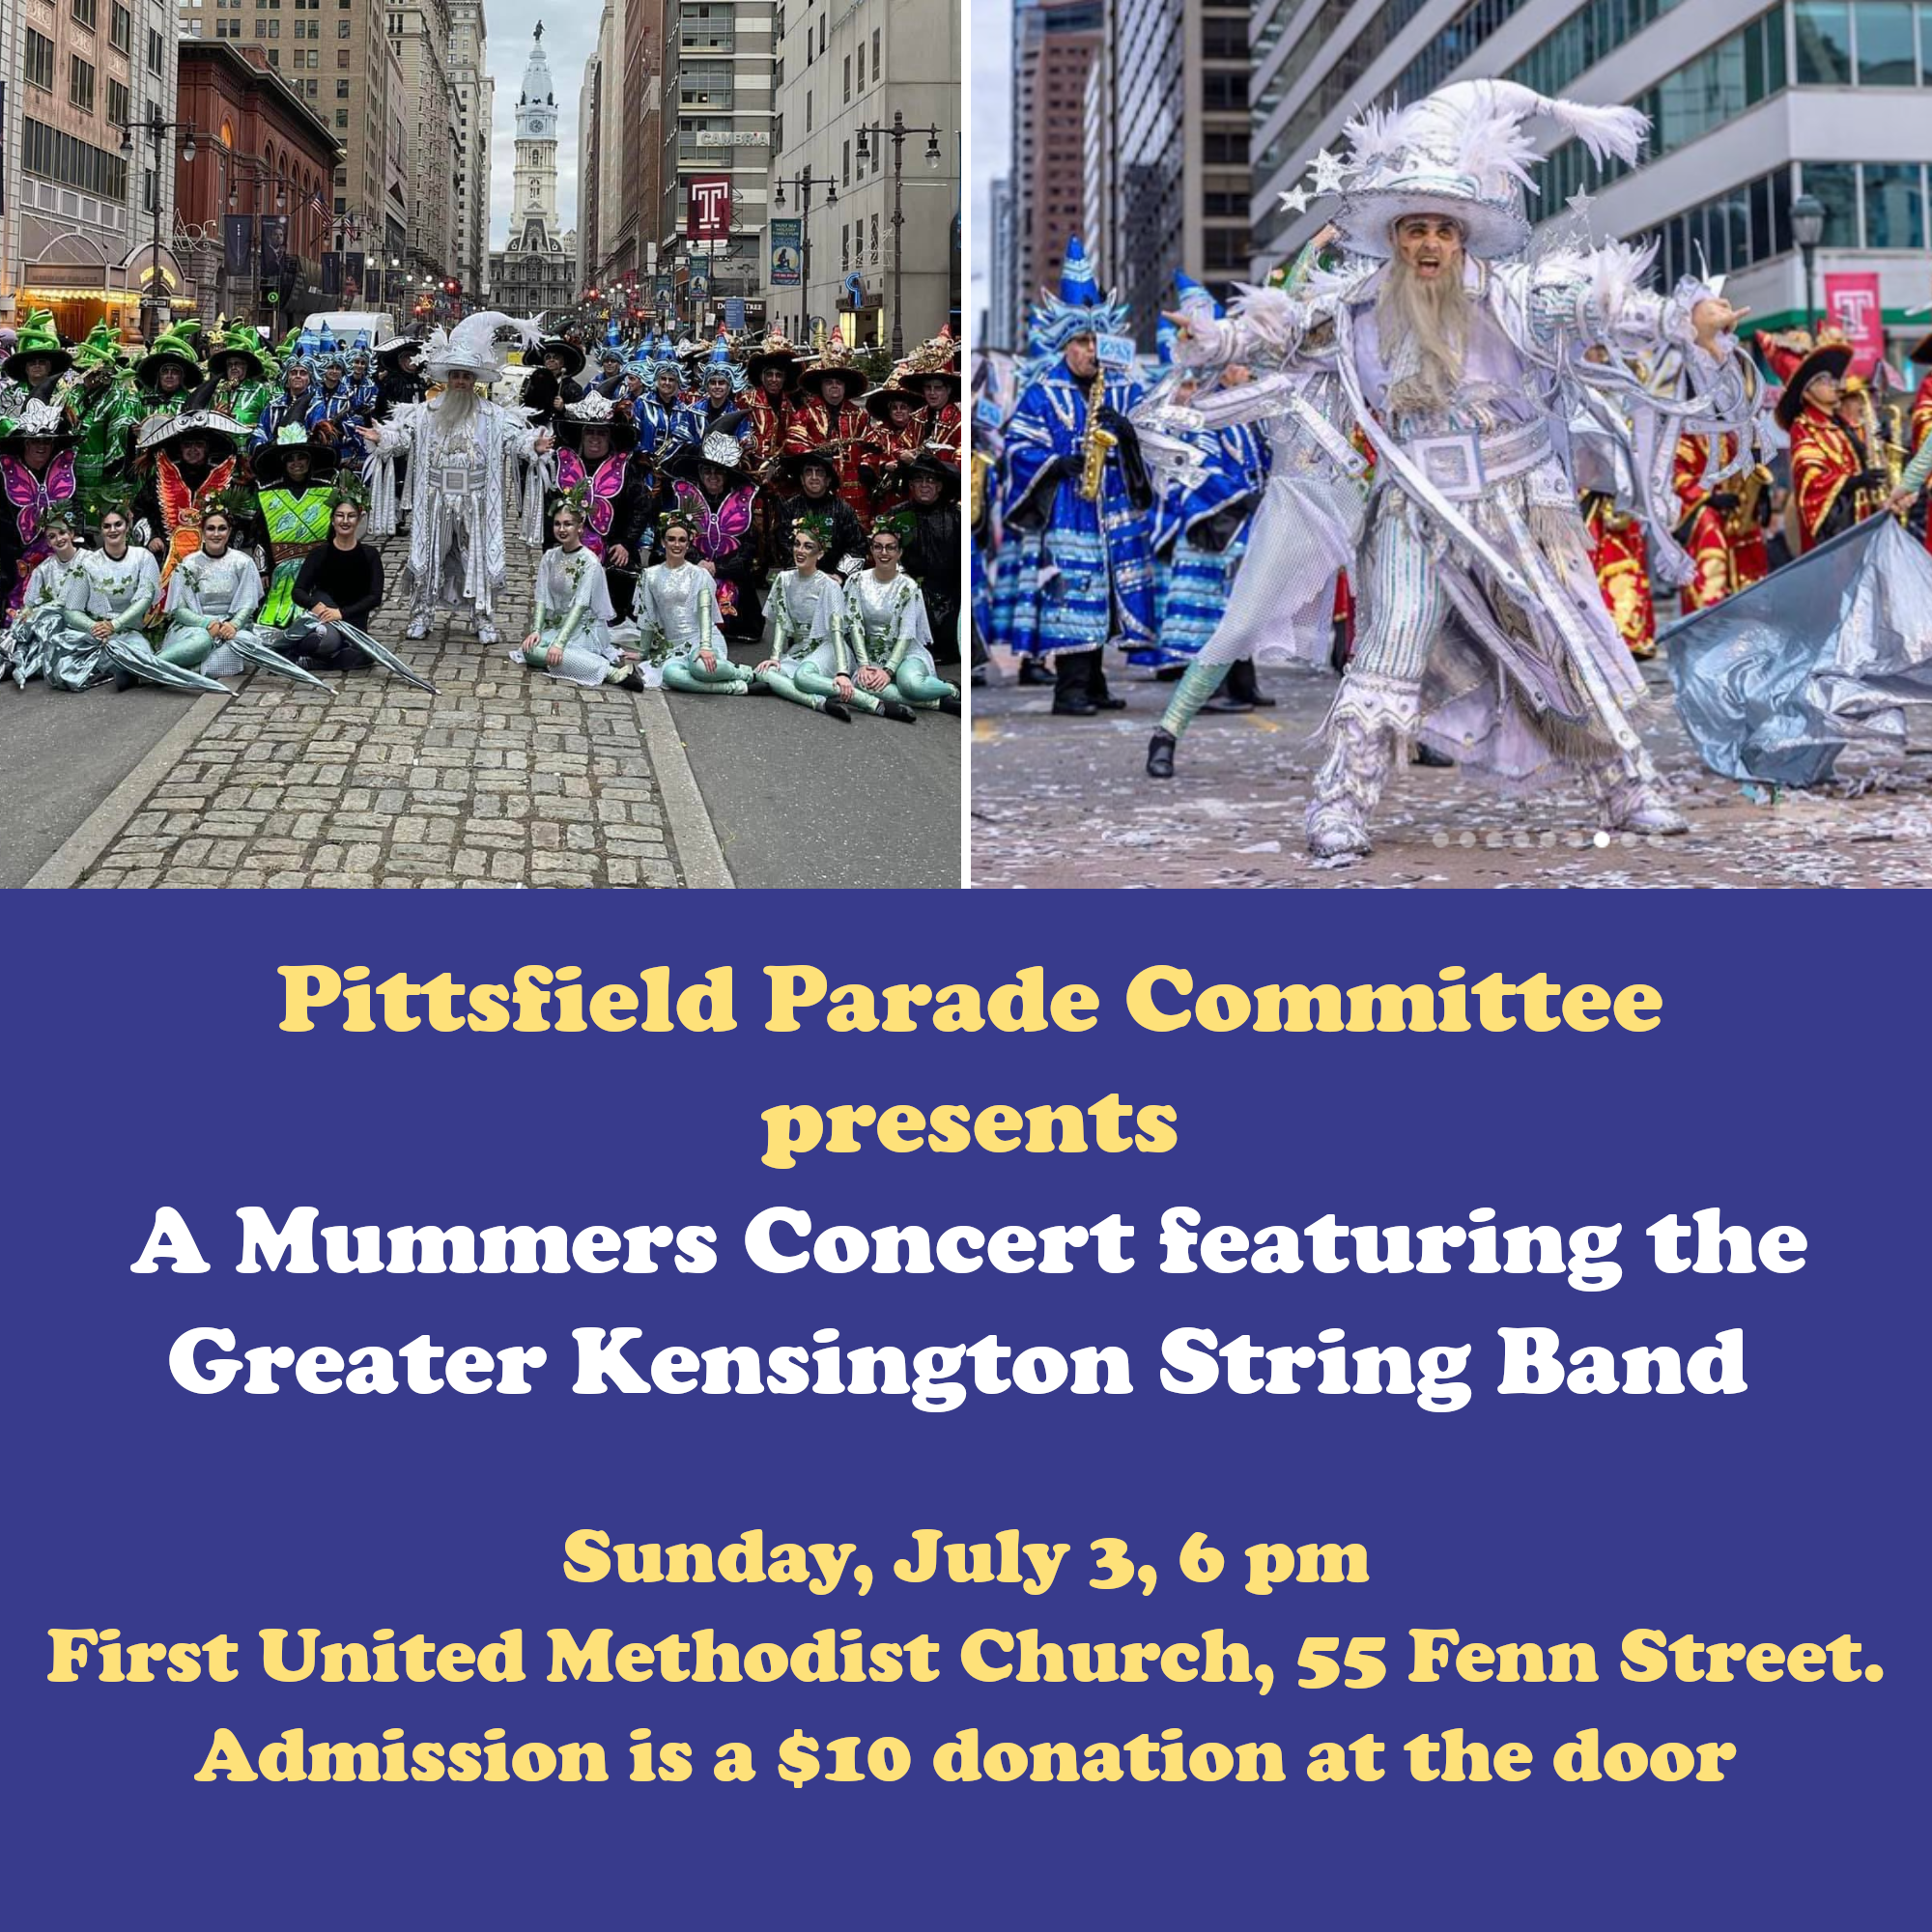 A Mummers Concert featuring the Greater Kensington String Band